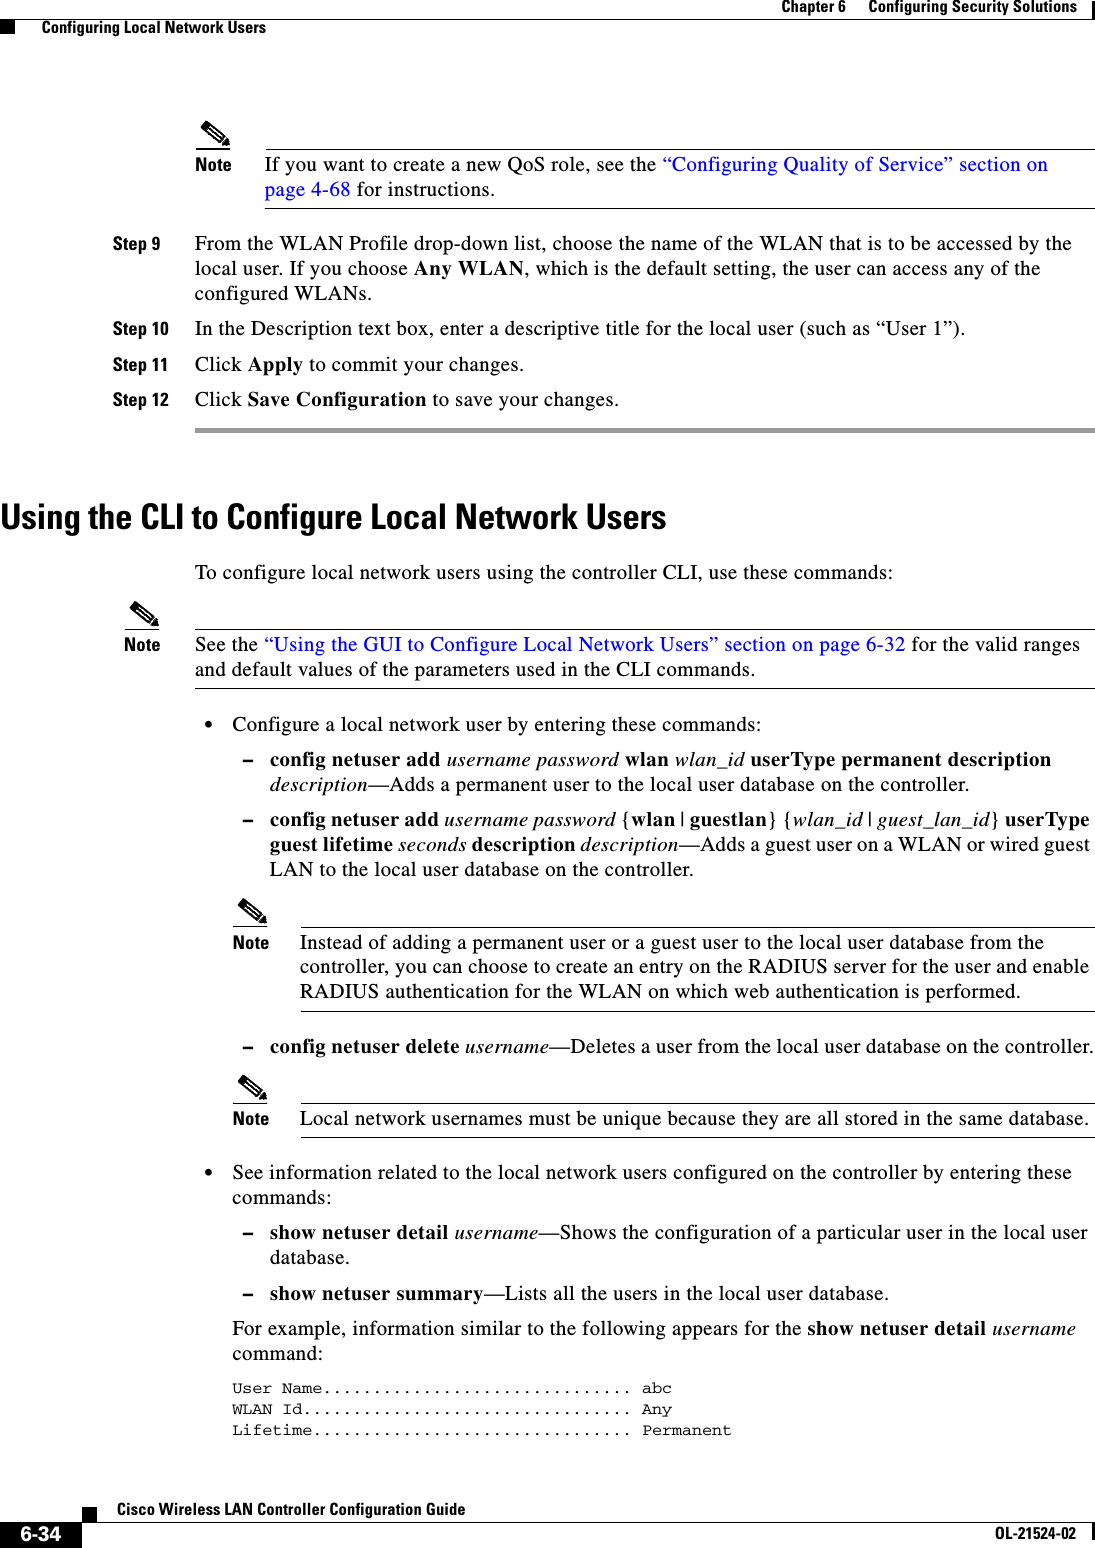  6-34Cisco Wireless LAN Controller Configuration GuideOL-21524-02Chapter 6      Configuring Security Solutions  Configuring Local Network UsersNote If you want to create a new QoS role, see the “Configuring Quality of Service” section on page 4-68 for instructions.Step 9 From the WLAN Profile drop-down list, choose the name of the WLAN that is to be accessed by the local user. If you choose Any WLAN, which is the default setting, the user can access any of the configured WLANs.Step 10 In the Description text box, enter a descriptive title for the local user (such as “User 1”).Step 11 Click Apply to commit your changes.Step 12 Click Save Configuration to save your changes.Using the CLI to Configure Local Network UsersTo configure local network users using the controller CLI, use these commands:Note See the “Using the GUI to Configure Local Network Users” section on page 6-32 for the valid ranges and default values of the parameters used in the CLI commands.  • Configure a local network user by entering these commands:  –config netuser add username password wlan wlan_id userType permanent description description—Adds a permanent user to the local user database on the controller.  –config netuser add username password {wlan | guestlan} {wlan_id | guest_lan_id} userType guest lifetime seconds description description—Adds a guest user on a WLAN or wired guest LAN to the local user database on the controller.Note Instead of adding a permanent user or a guest user to the local user database from the controller, you can choose to create an entry on the RADIUS server for the user and enable RADIUS authentication for the WLAN on which web authentication is performed.  –config netuser delete username—Deletes a user from the local user database on the controller.Note Local network usernames must be unique because they are all stored in the same database.  • See information related to the local network users configured on the controller by entering these commands:  –show netuser detail username—Shows the configuration of a particular user in the local user database.  –show netuser summary—Lists all the users in the local user database.For example, information similar to the following appears for the show netuser detail username command:User Name............................... abcWLAN Id................................. AnyLifetime................................ Permanent